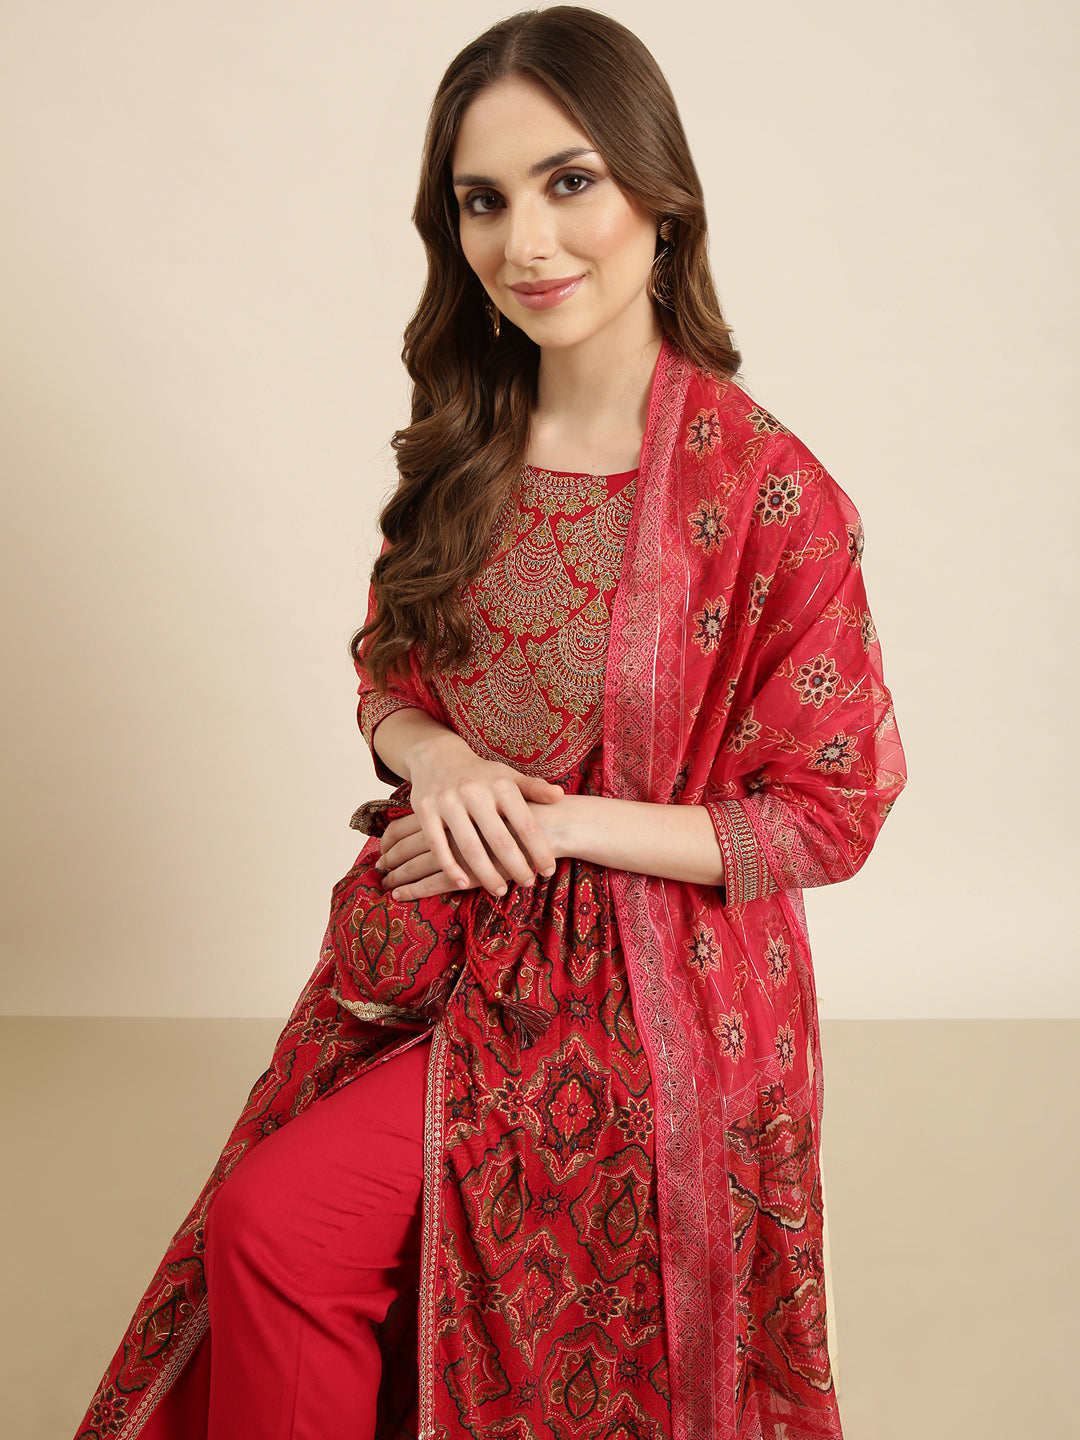 Women Anarkali Red Ethnic Motifs Kurta and Trousers Set Comes With Dupatta and Potli Bag